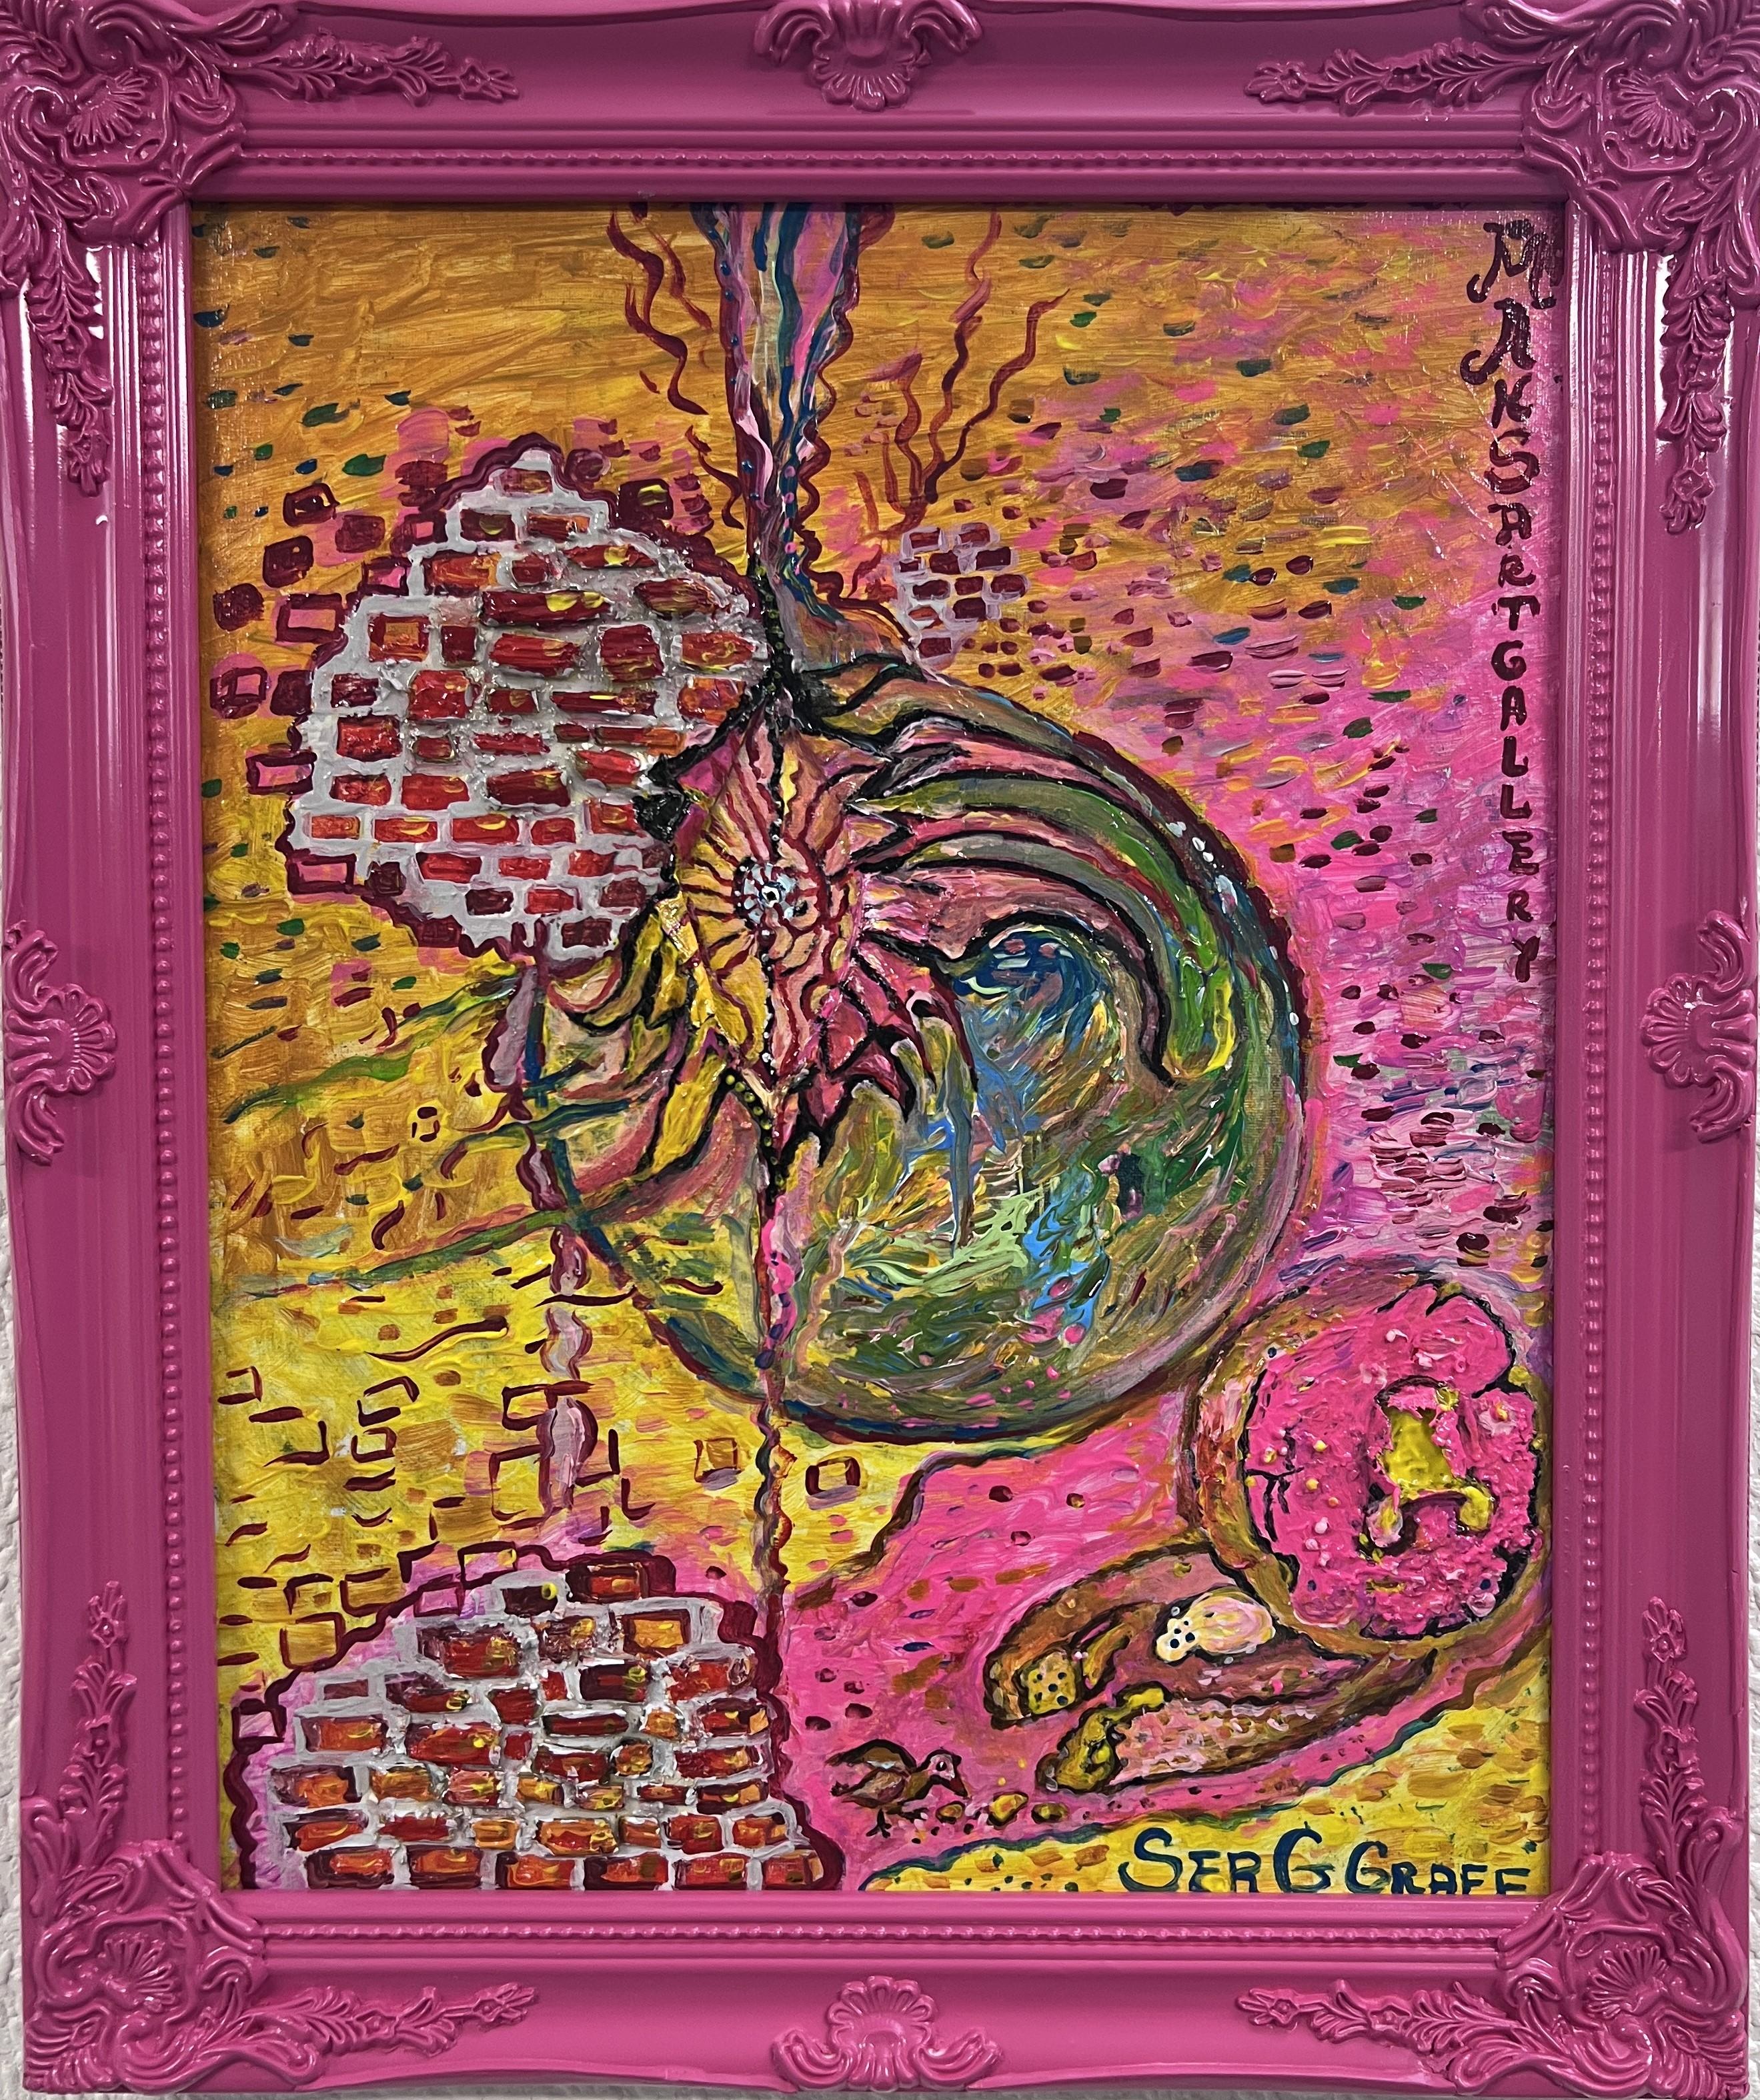 This is a unique original acrylic/mixed media textured painting on canvas in a fantasy abstract style by Serg Graff Titled "Donut". Very detailed. Bright colors and textured elements make this painting 3D and absolutely gorgeous.

It comes signed,